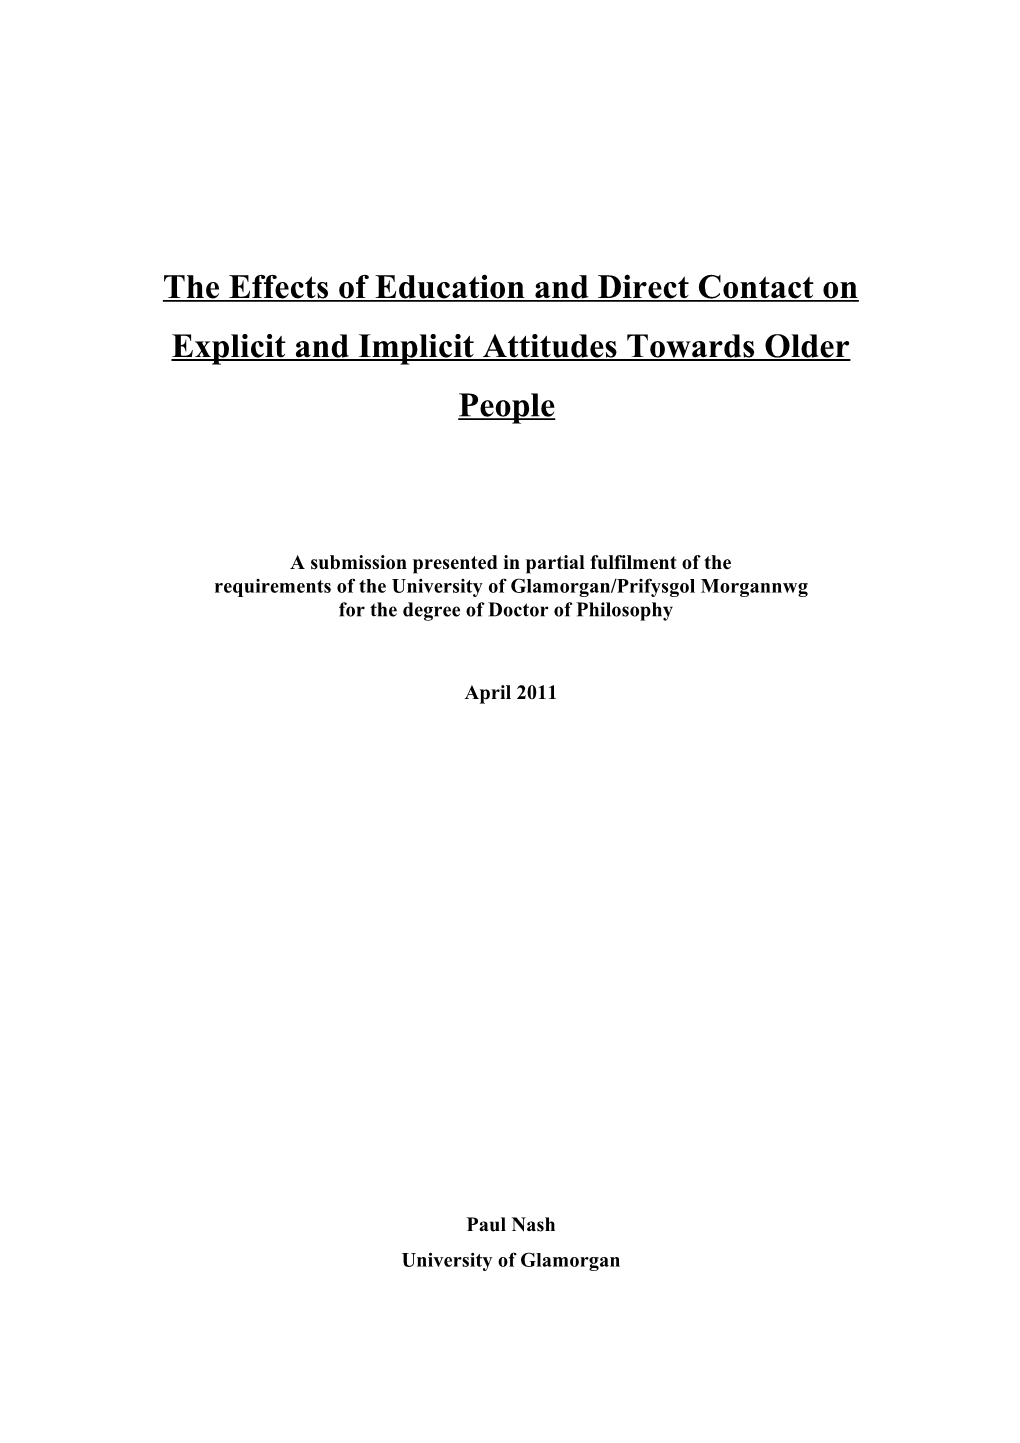 The Effects of Education and Direct Contact on Explicit and Implicit Attitudes Towards